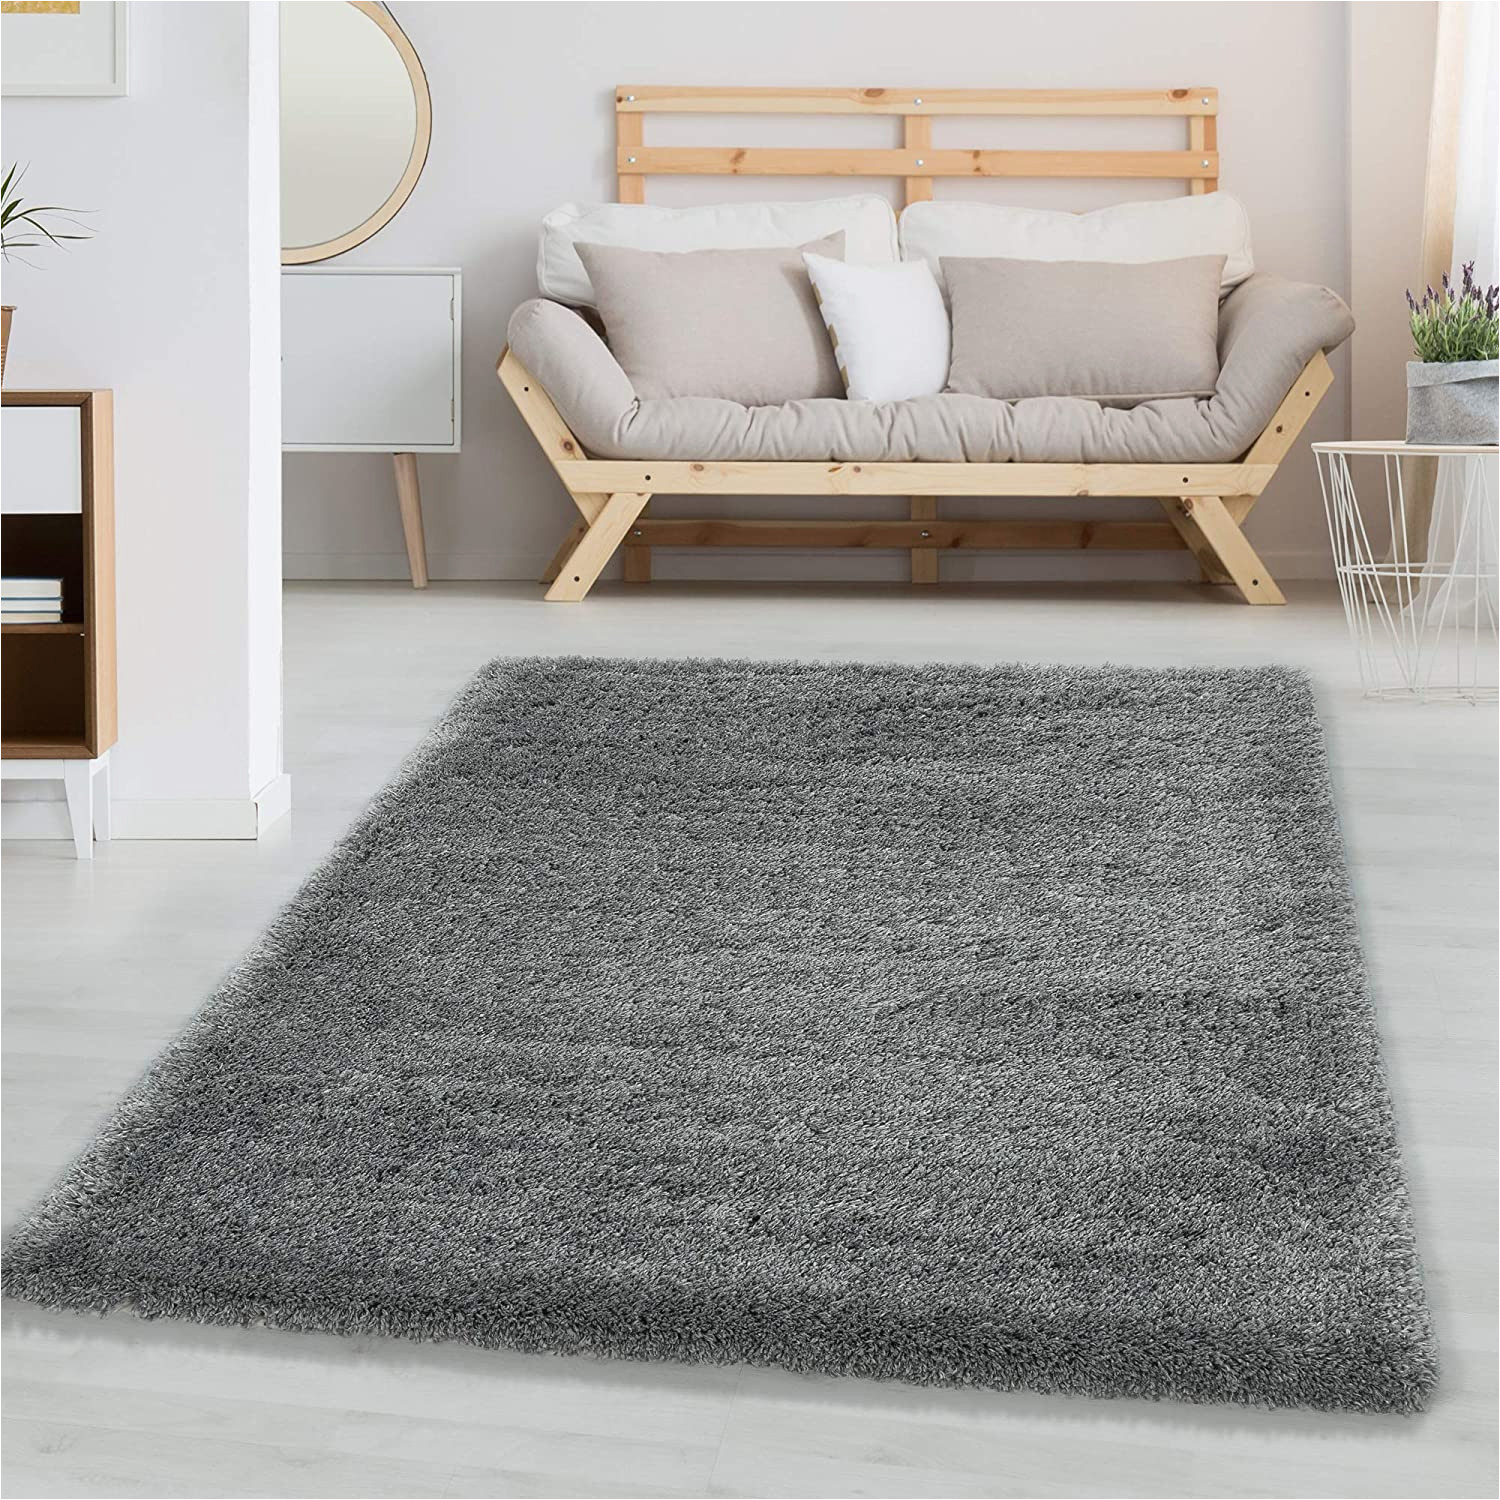 Area Rugs at Rooms to Go Living Room Rug High Pile Super soft Shaggy Pile soft Colour Light Grey Size: 80 Cm Round